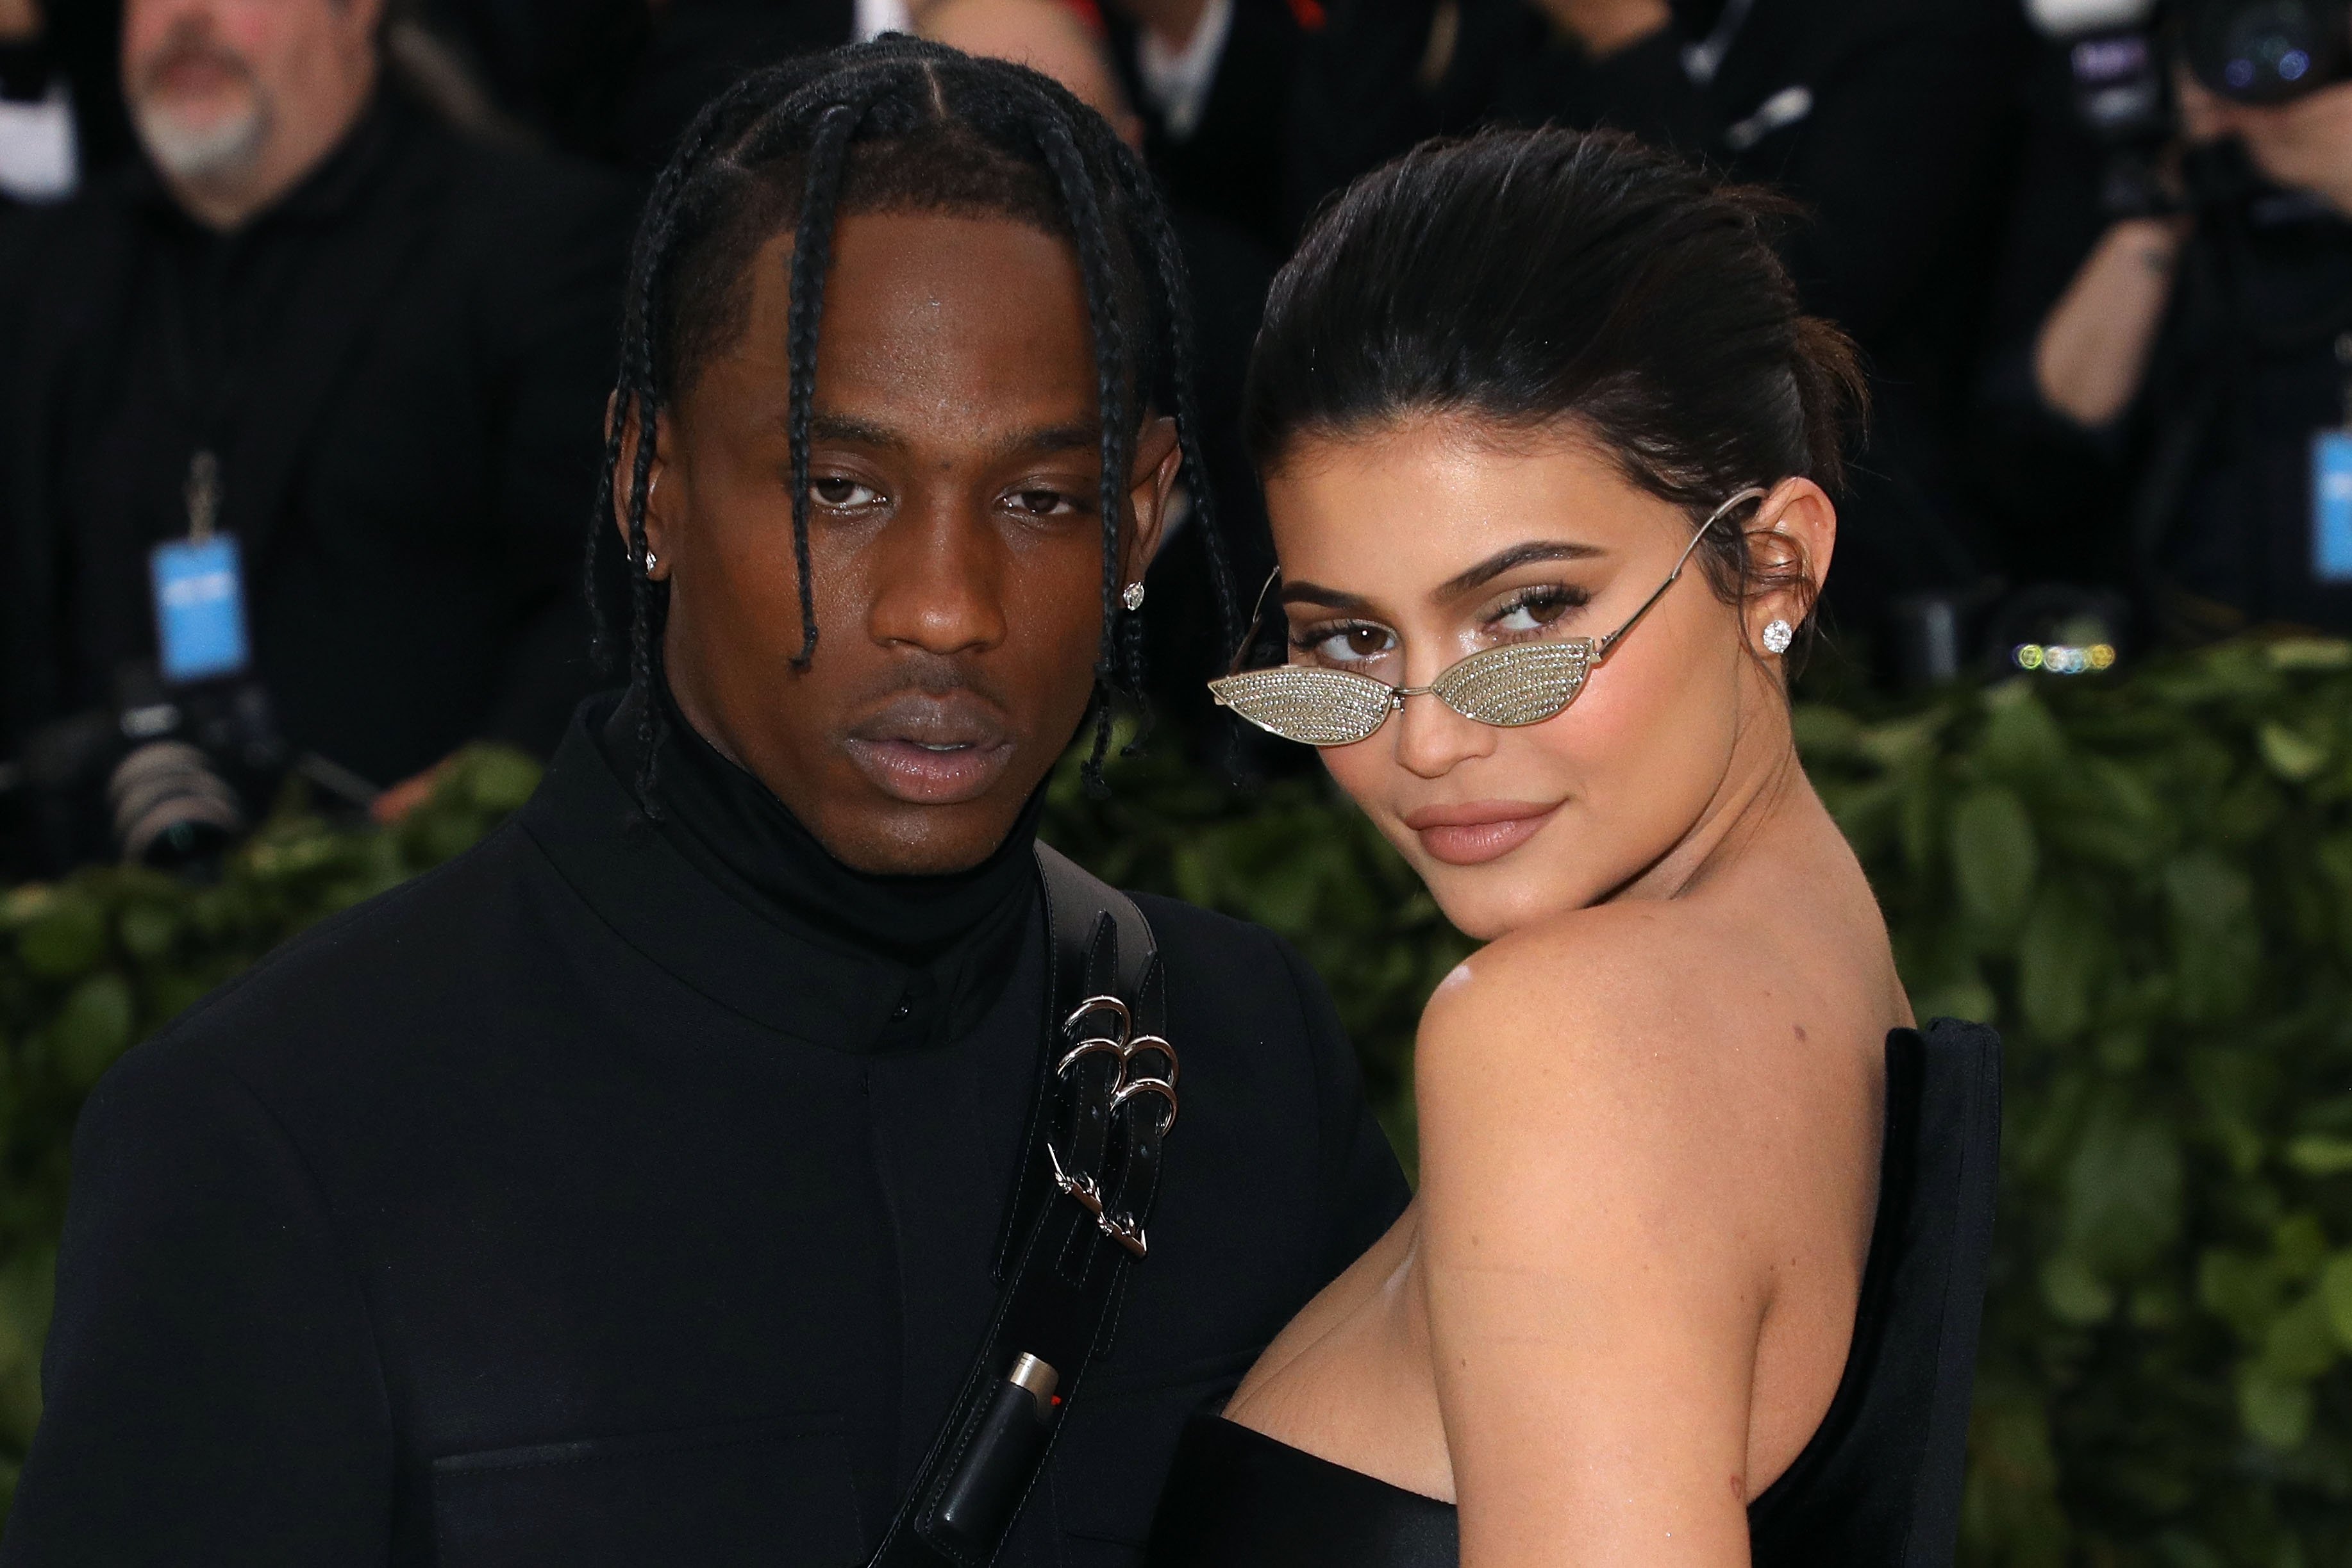  Travis Scott and Kylie Jenner attend the 2018 Costume Institute Benefit at Metropolitan Museum of Art on May 7, 2018. | Source: Getty Images